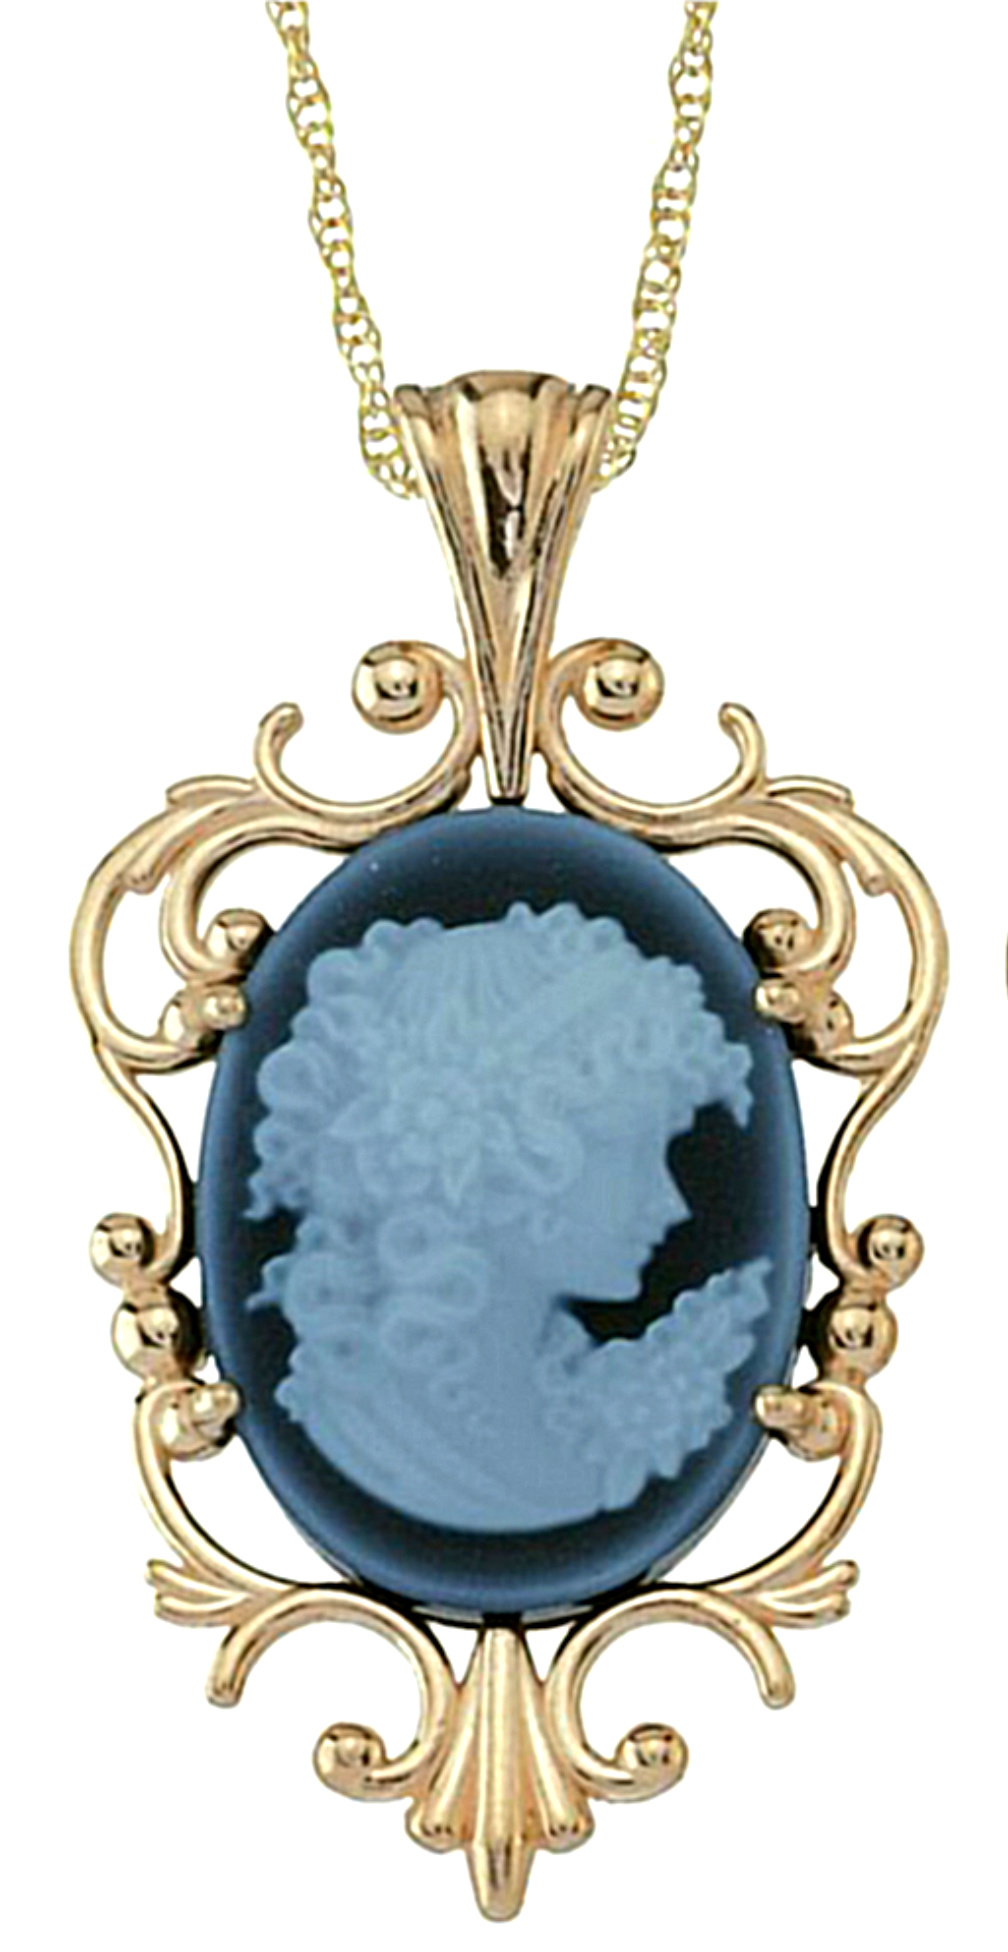 Oval Agate Cameo Victorian Style Pendant Necklace, 10k Yellow Gold, 12k Green and Rose Gold Black Hills Gold Motif